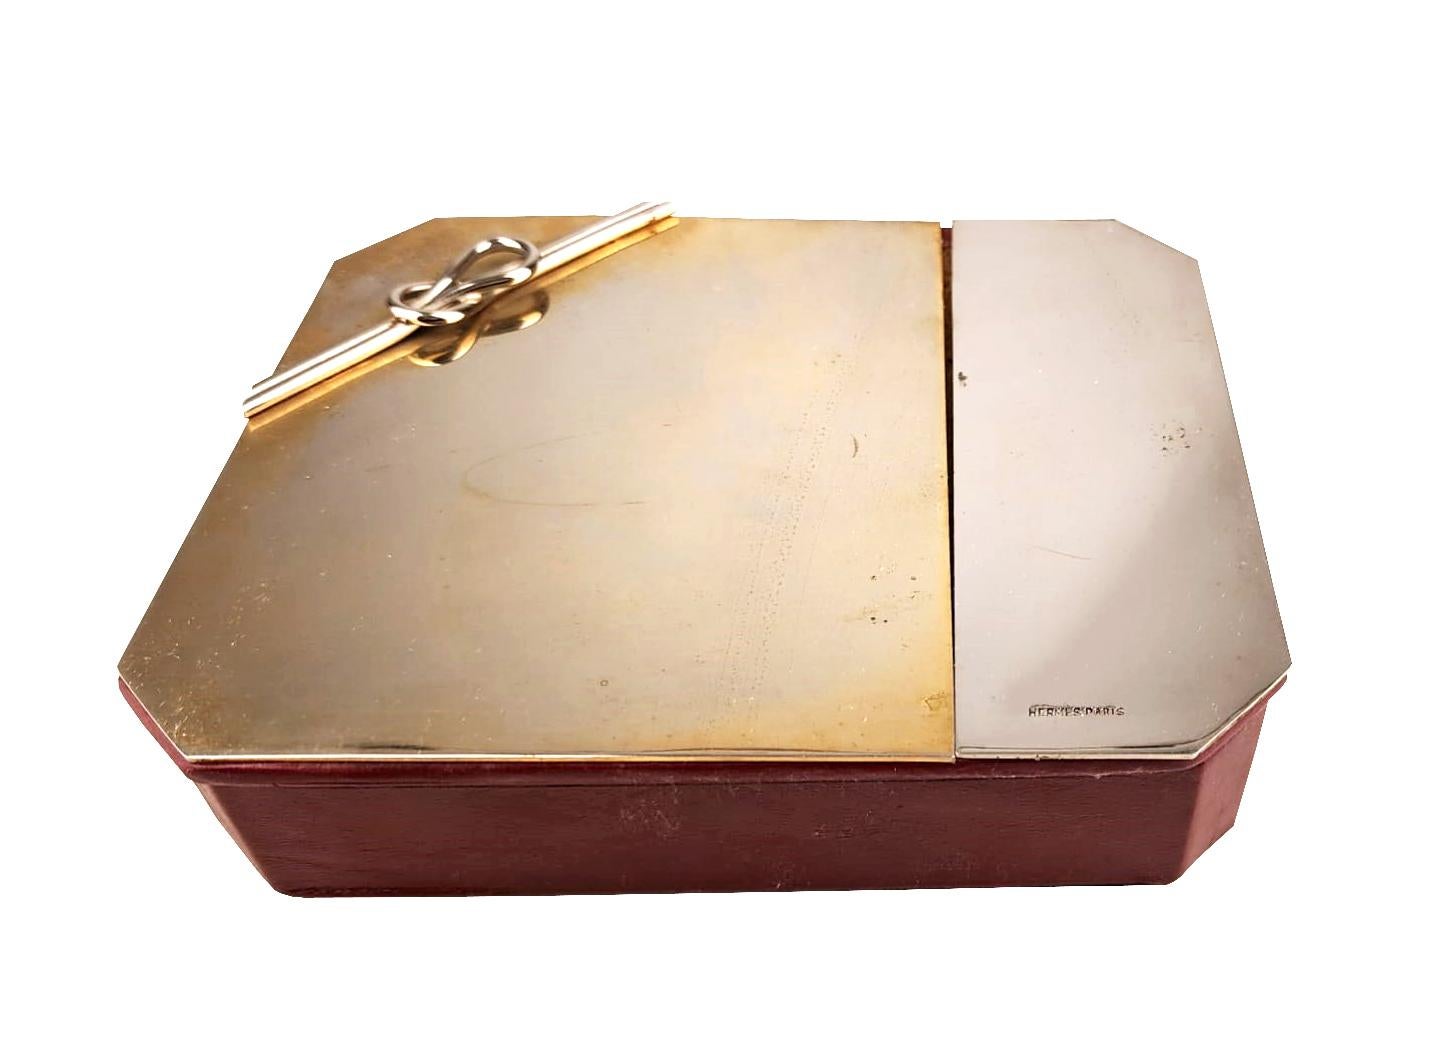 Mid-Century Modern Mid-20th Century Wooden Box with Silver Knot Lid by the French Firm Hermès Paris For Sale